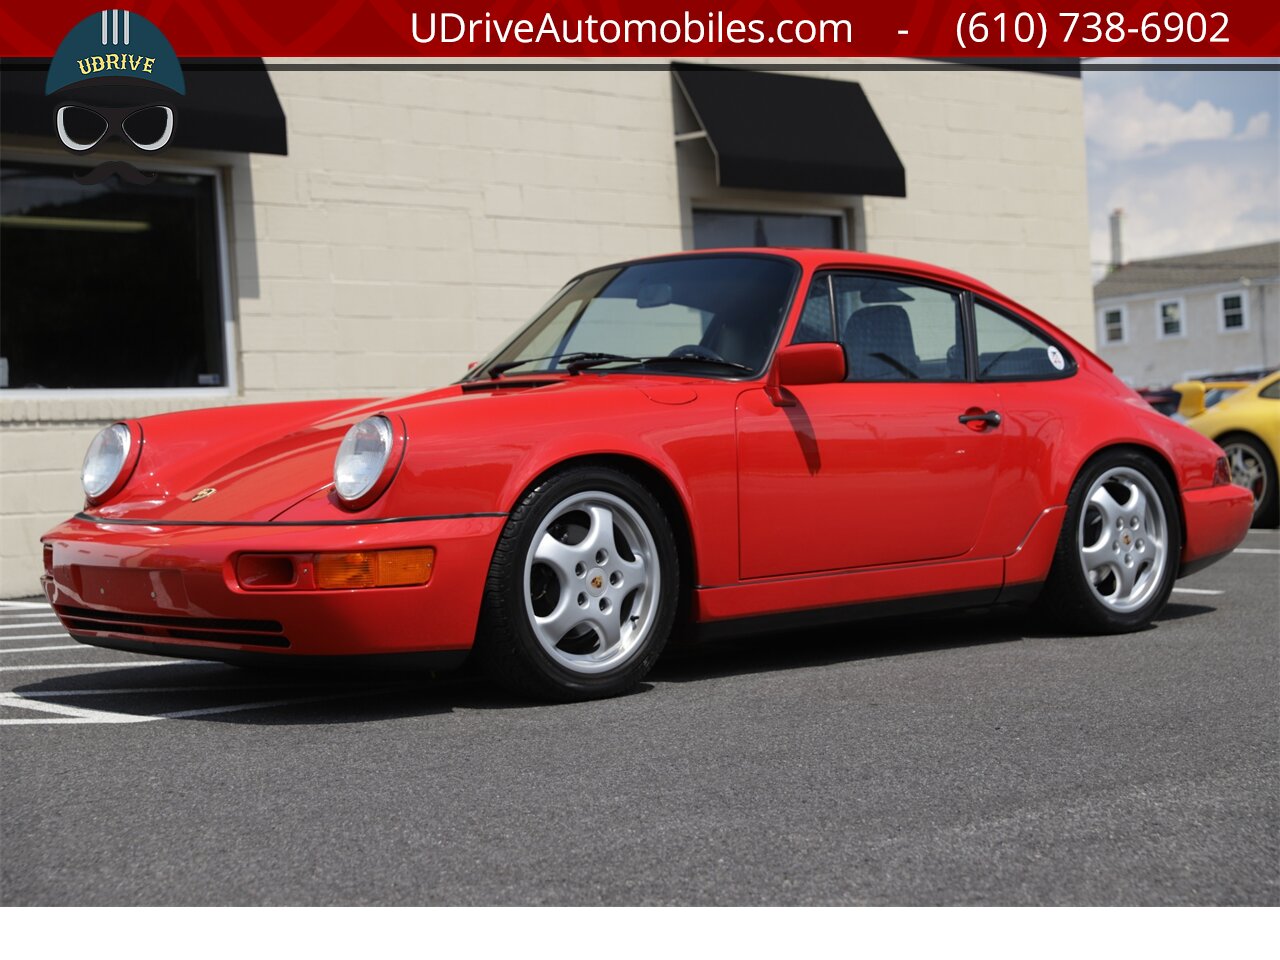 1989 Porsche 911 Carrera 4 964 C4 5 Speed Engine Rebuild  $40k in Service History Cup 1 Wheels - Photo 8 - West Chester, PA 19382